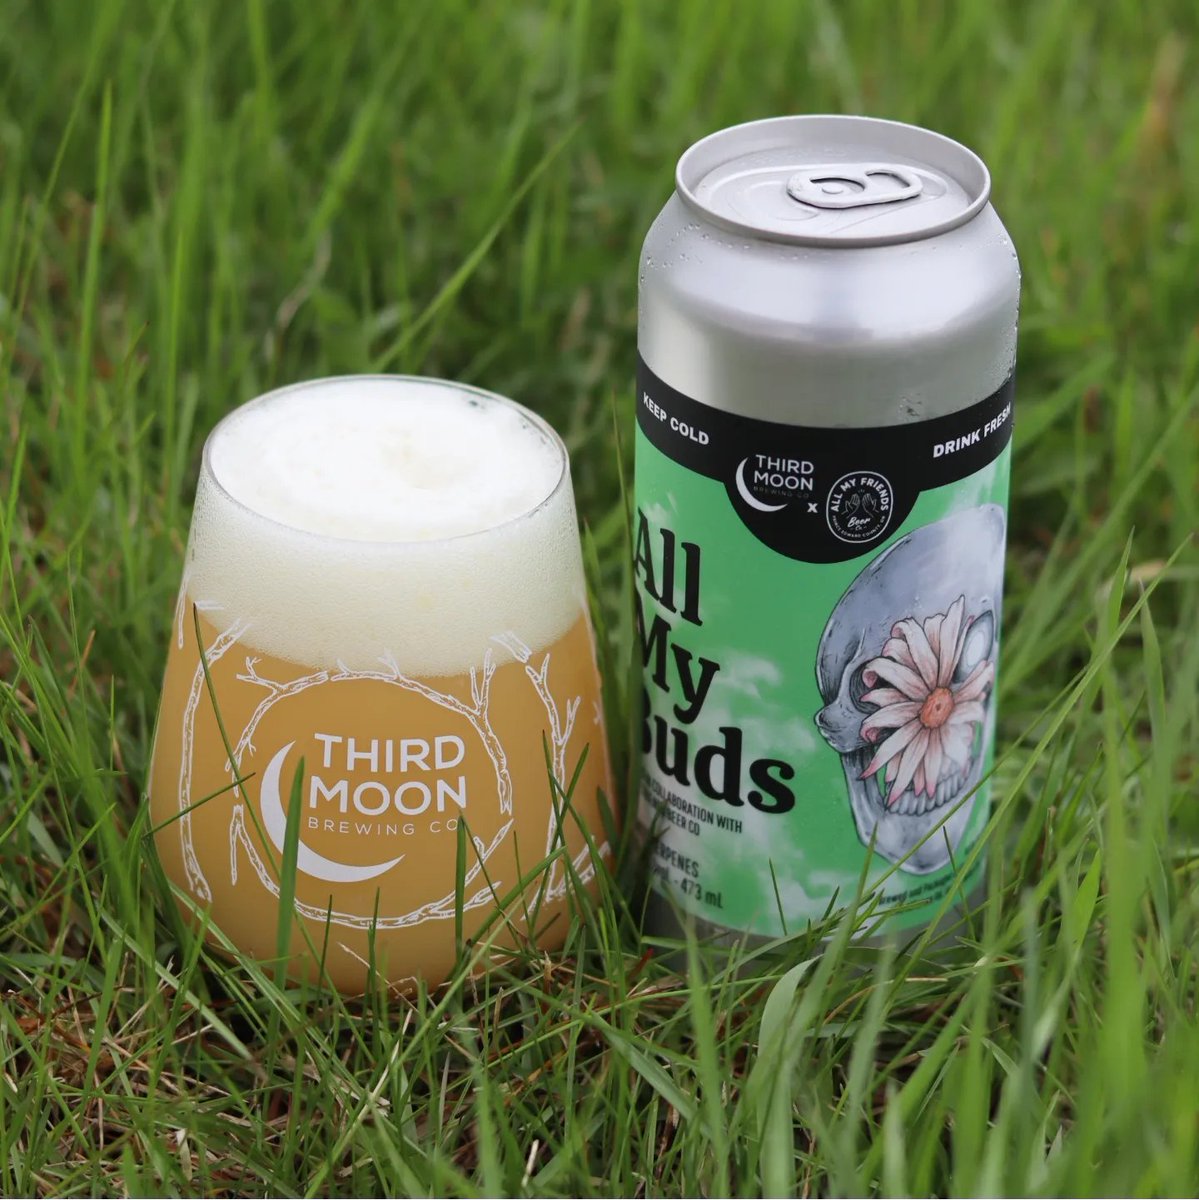 4/20 week continues 🌳💨 Final release this week is a 4/20 special brewed with our friends All My Friends Beer Co from Bloomfield - All My Buds! See our Instagram for full details 🍻